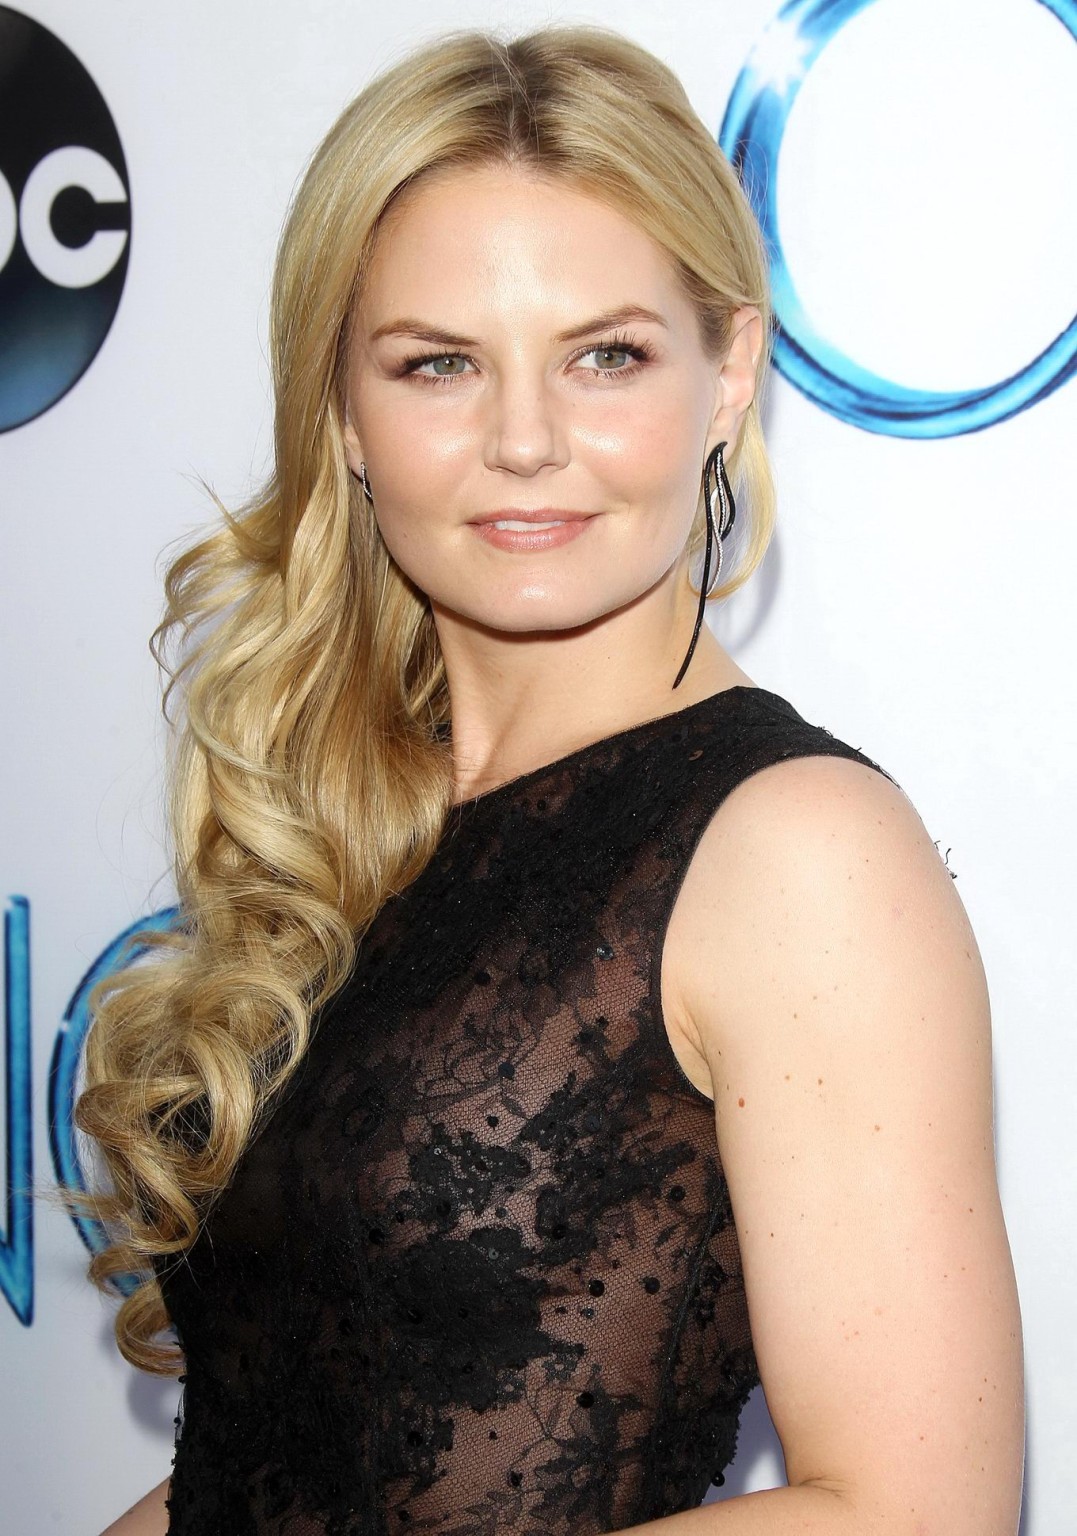 Jennifer Morrison shows off her boobs wearing a see through lace dress at the On #75185191